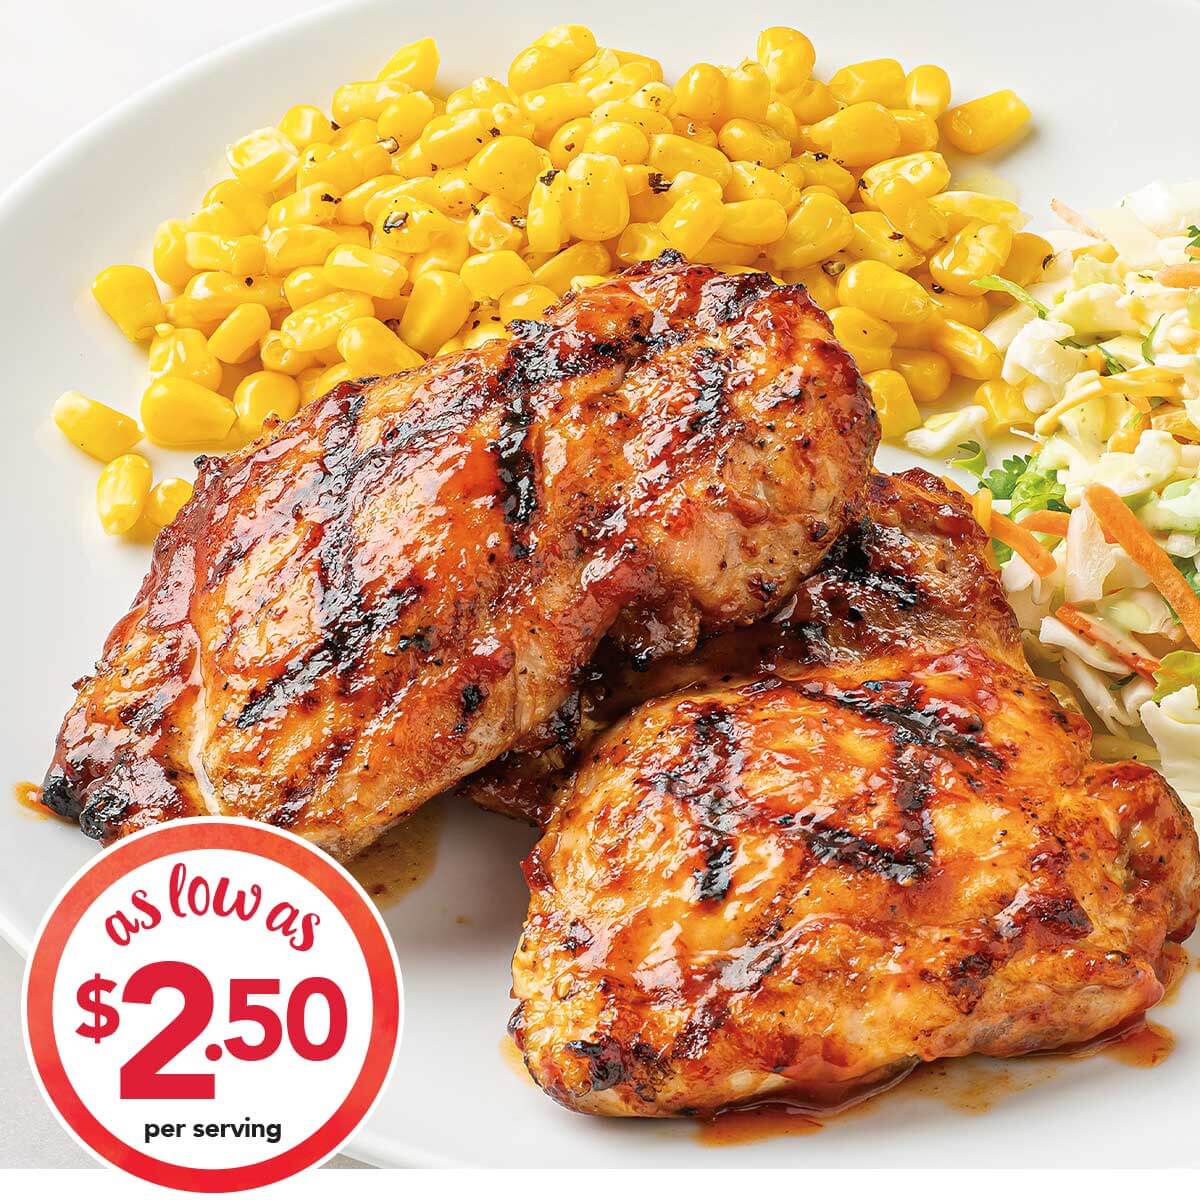 BBQ Chicken Thighs with Chopped Salad & Corn as low as $2.50 per serving